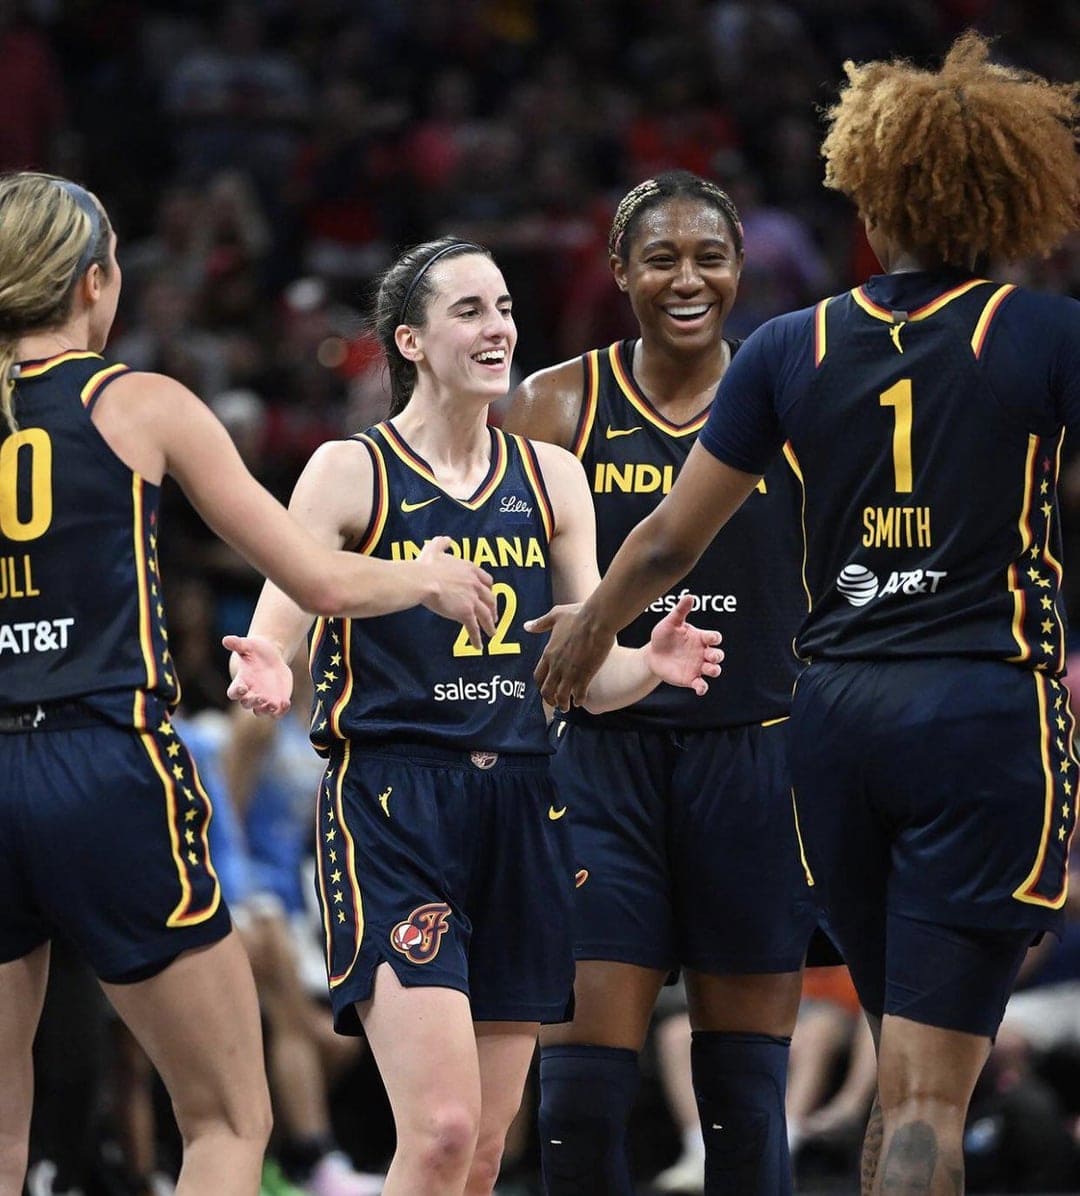 Caitlin Clark Sets New WNBA Rookie Record for Points, Assists, and Rebounds